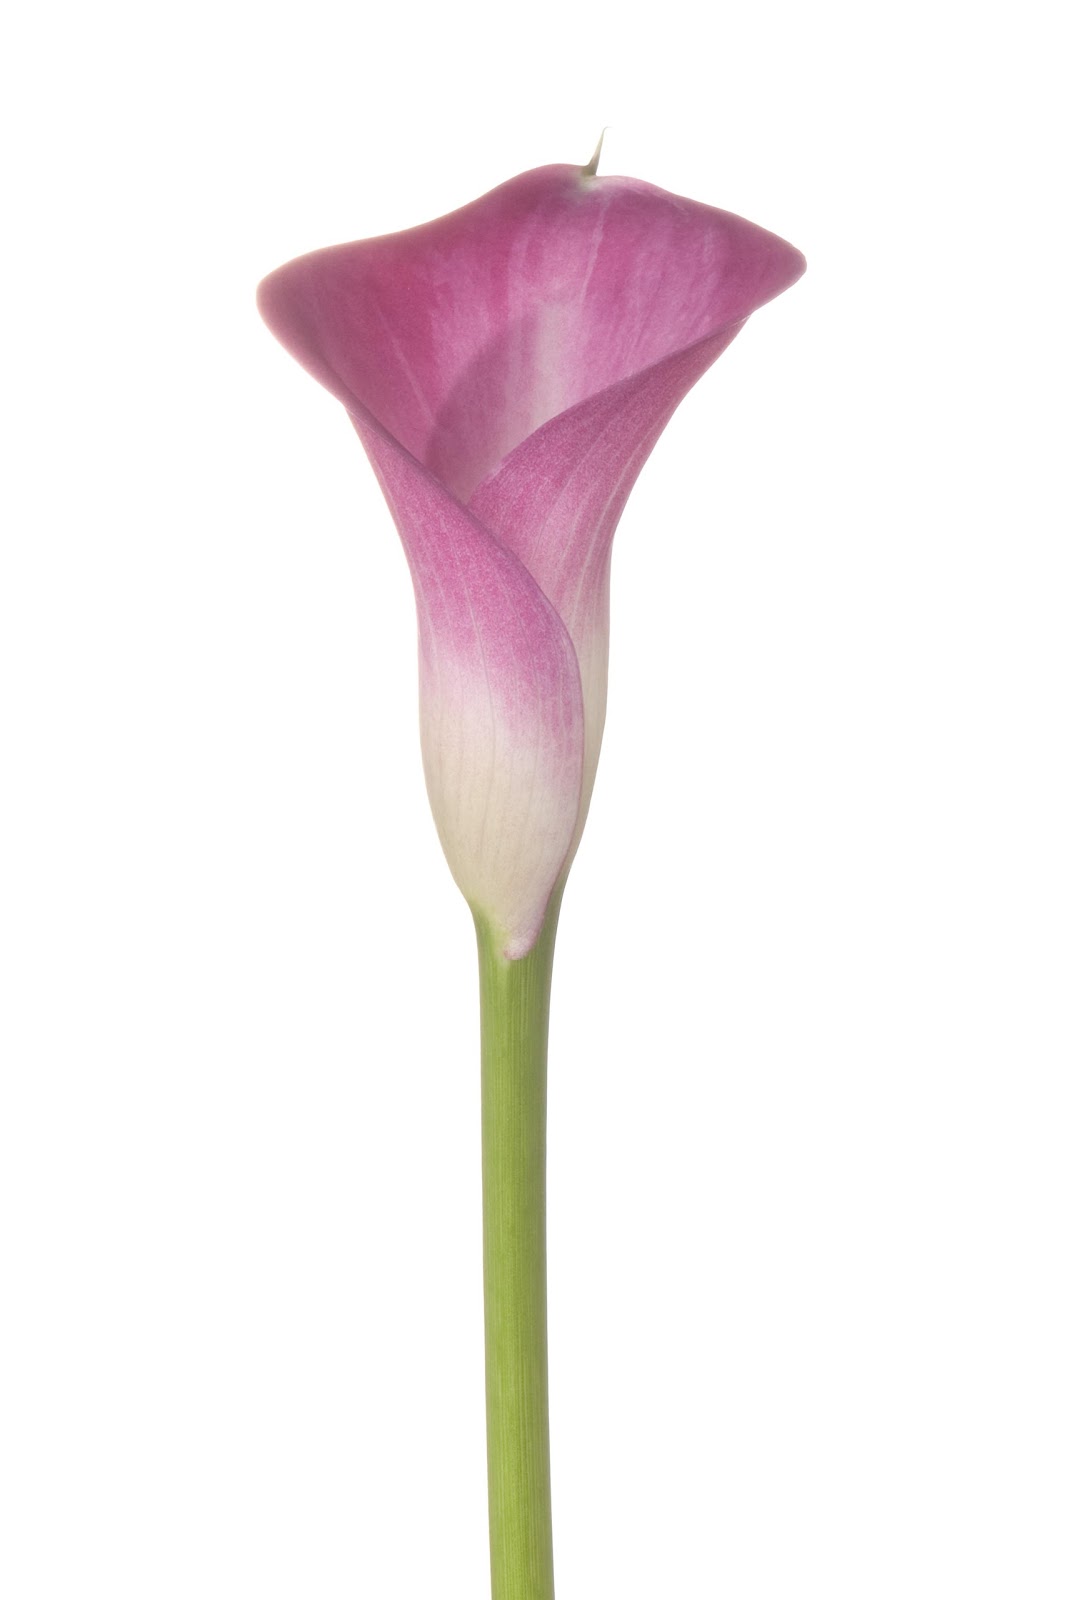 These pink Mini-Callas are the